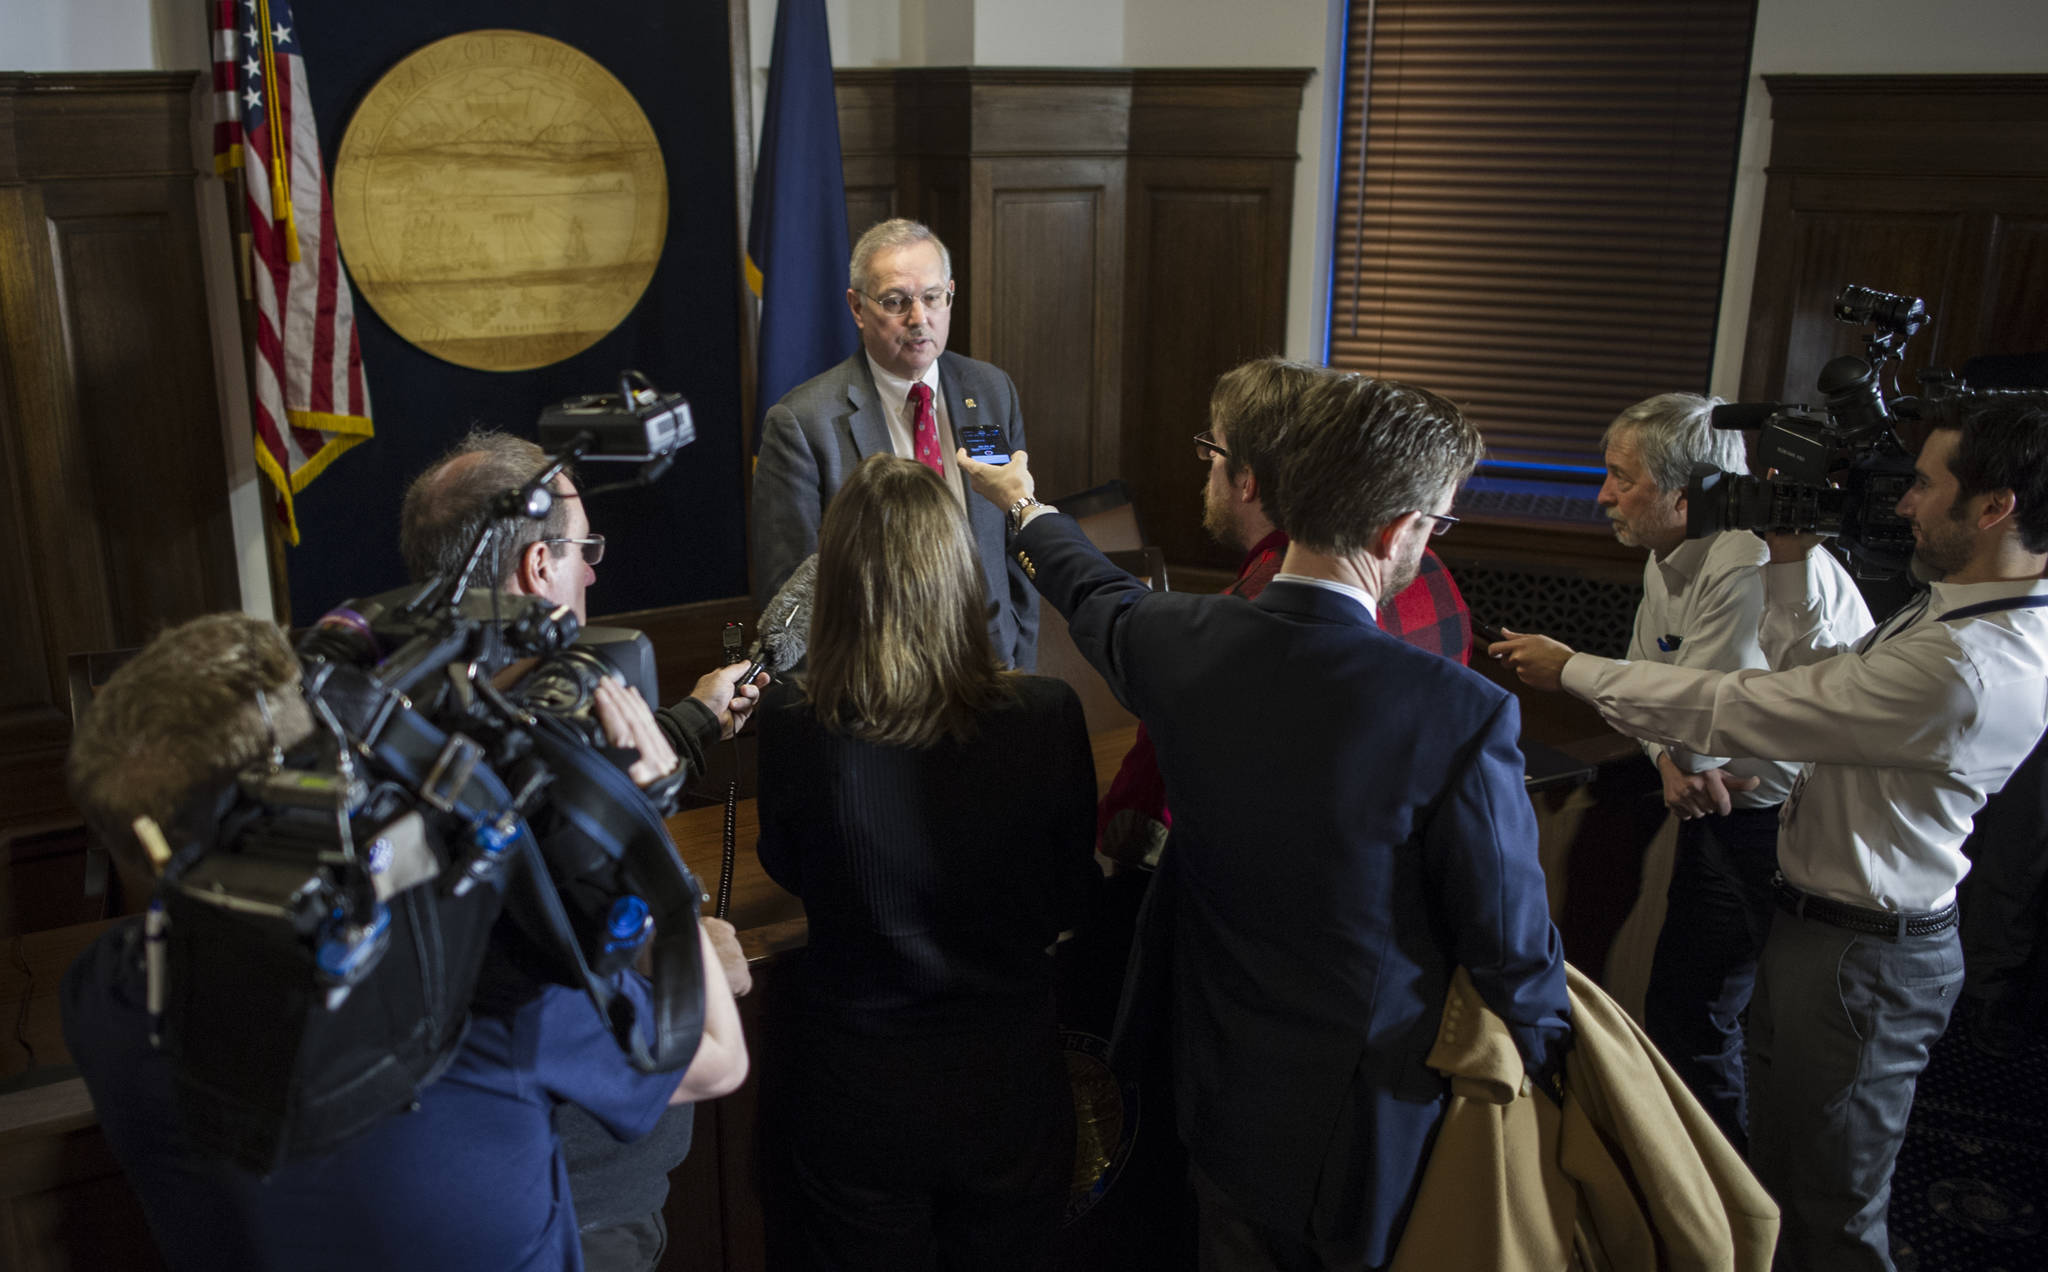 Speaker of the House Rep. Bryce Edgmon, D-Dillingham, is questioned by reporters about Rep. Zach Fansler, D-Bethel, at the Capitol on Tuesday, Jan. 30, 2018. Rep. Fansler has been accused of striking a woman in his hotel room last week. (Michael Penn | Juneau Empire)  Speaker of the House Rep. Bryce Edgmon, D-Dillingham, is questioned by reporters about Rep. Zach Fansler, D-Bethel, at the Capitol on Tuesday, Jan. 30, 2018. Rep. Fansler has been accused of striking a woman in his hotel room last week. (Michael Penn | Juneau Empire)